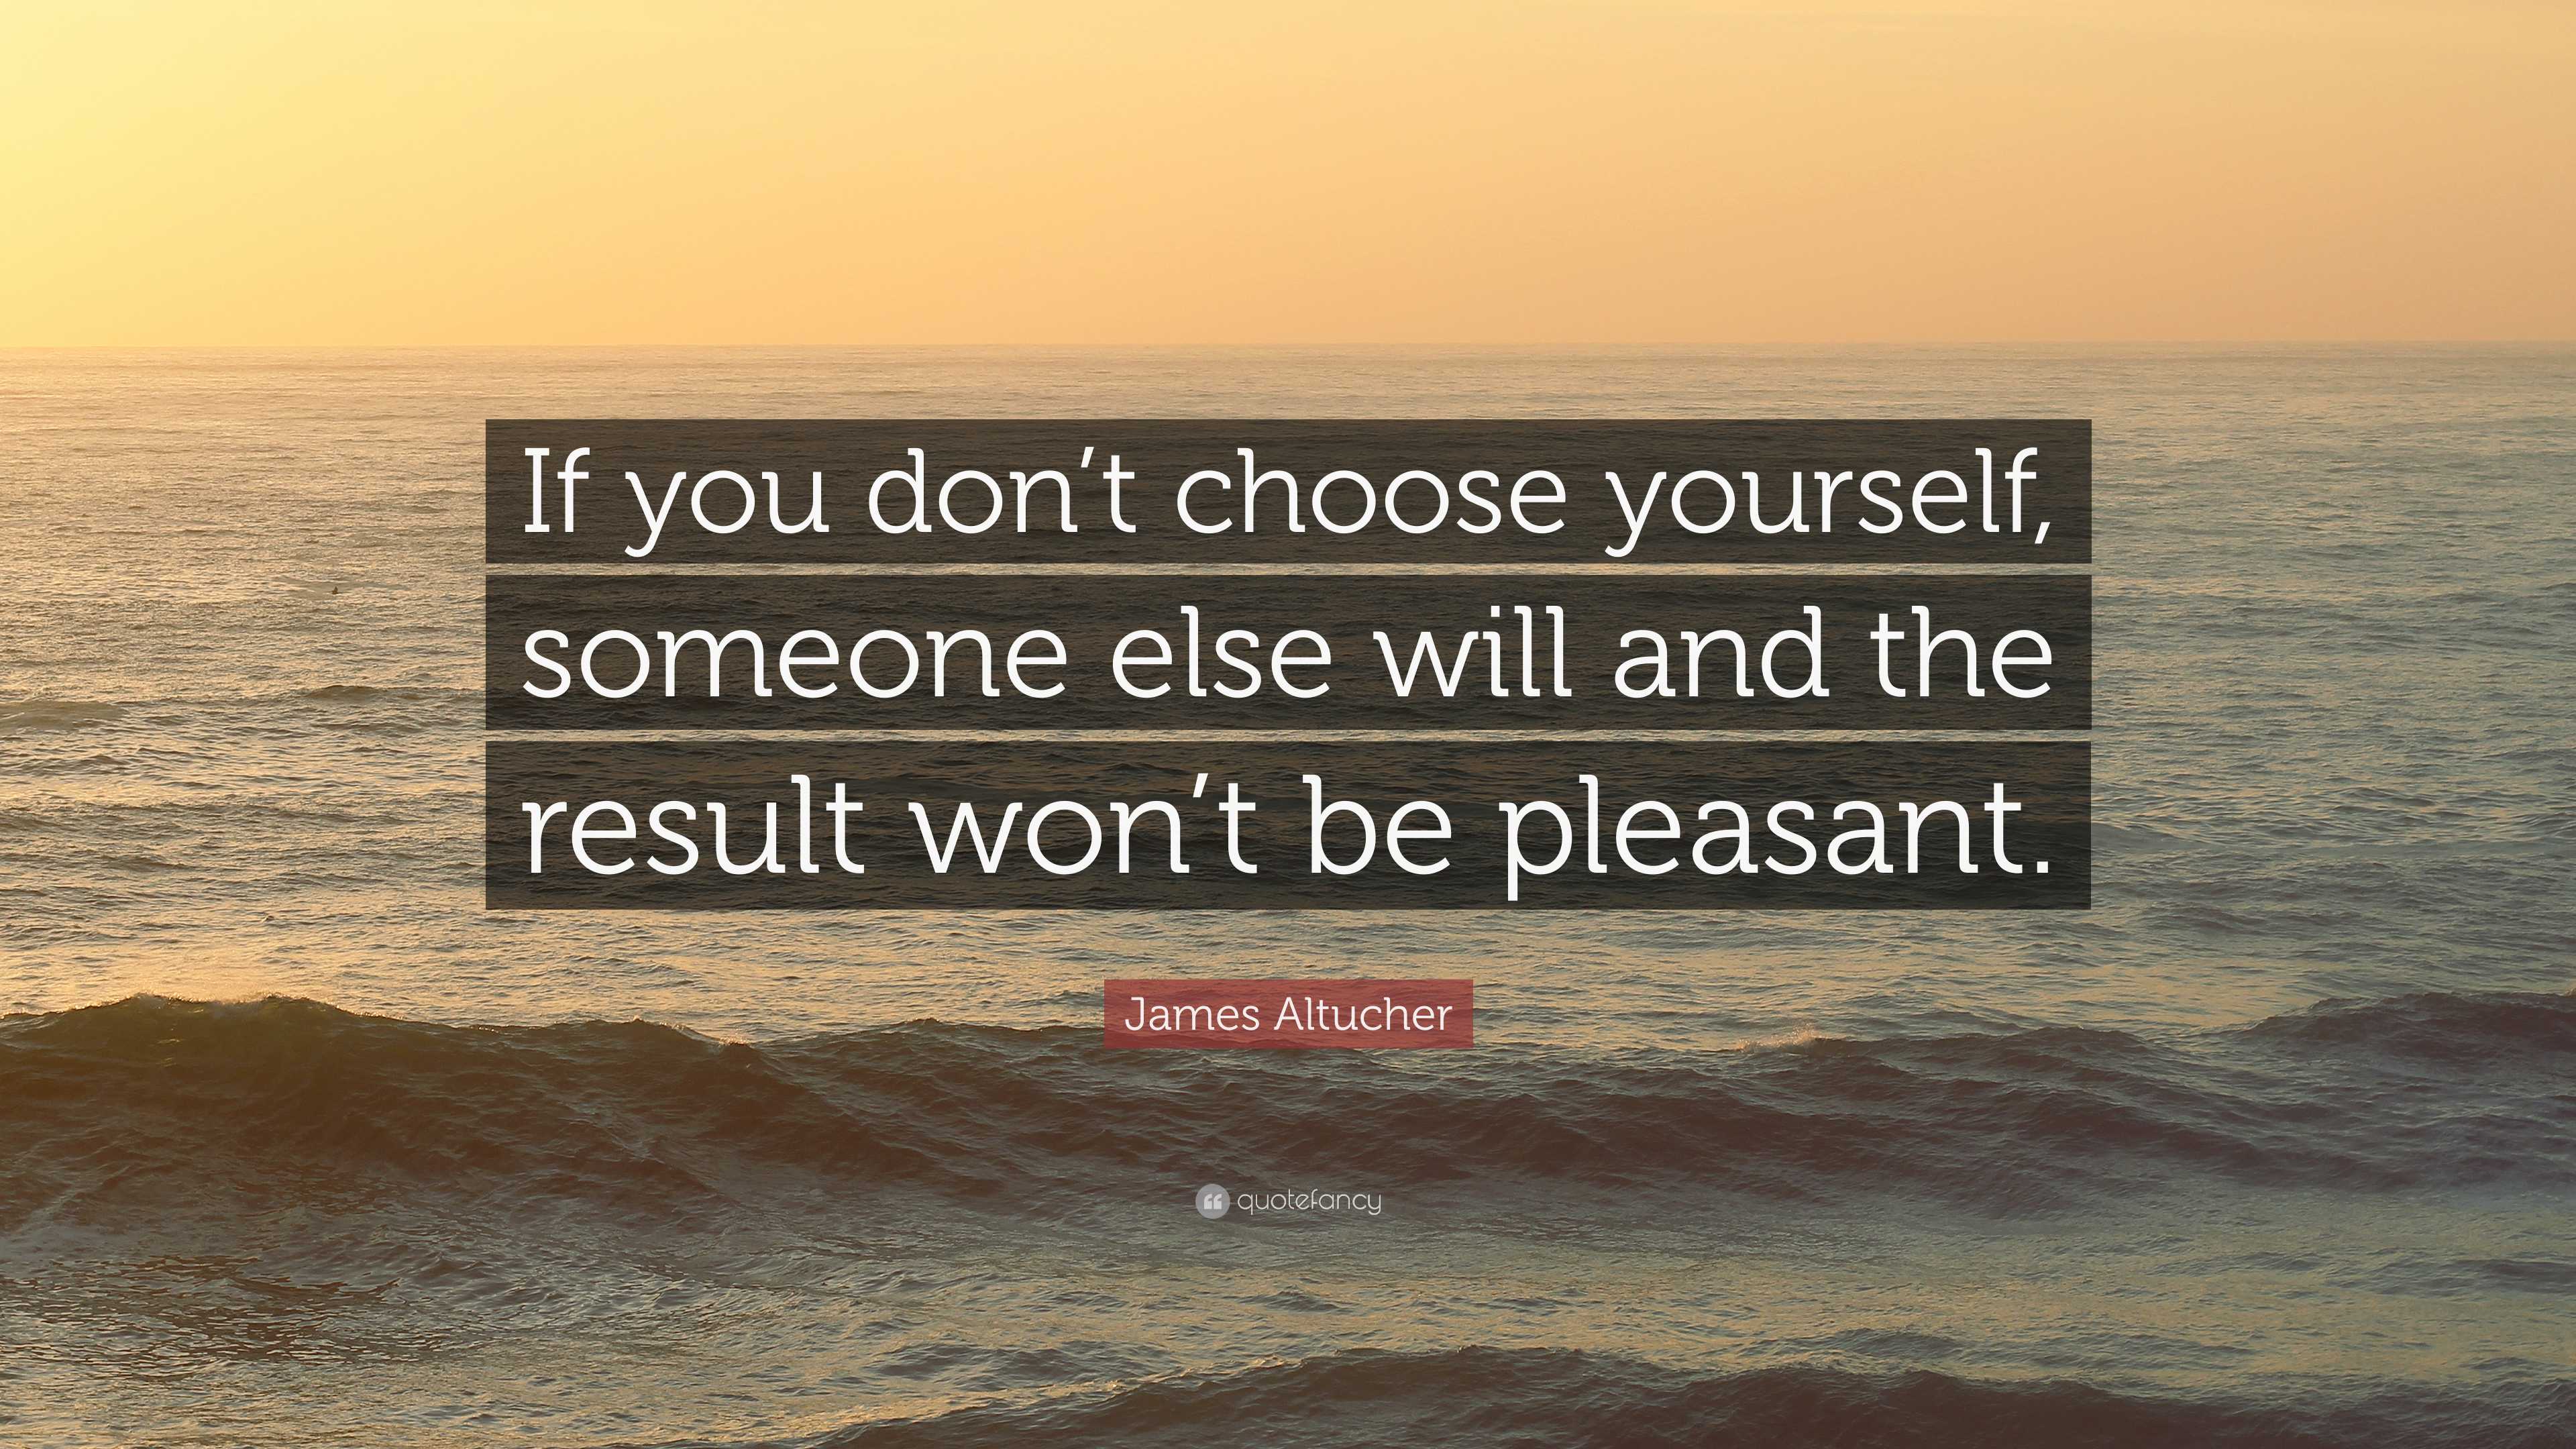 James Altucher Quote: “If you don't choose yourself, someone else will and  the result won